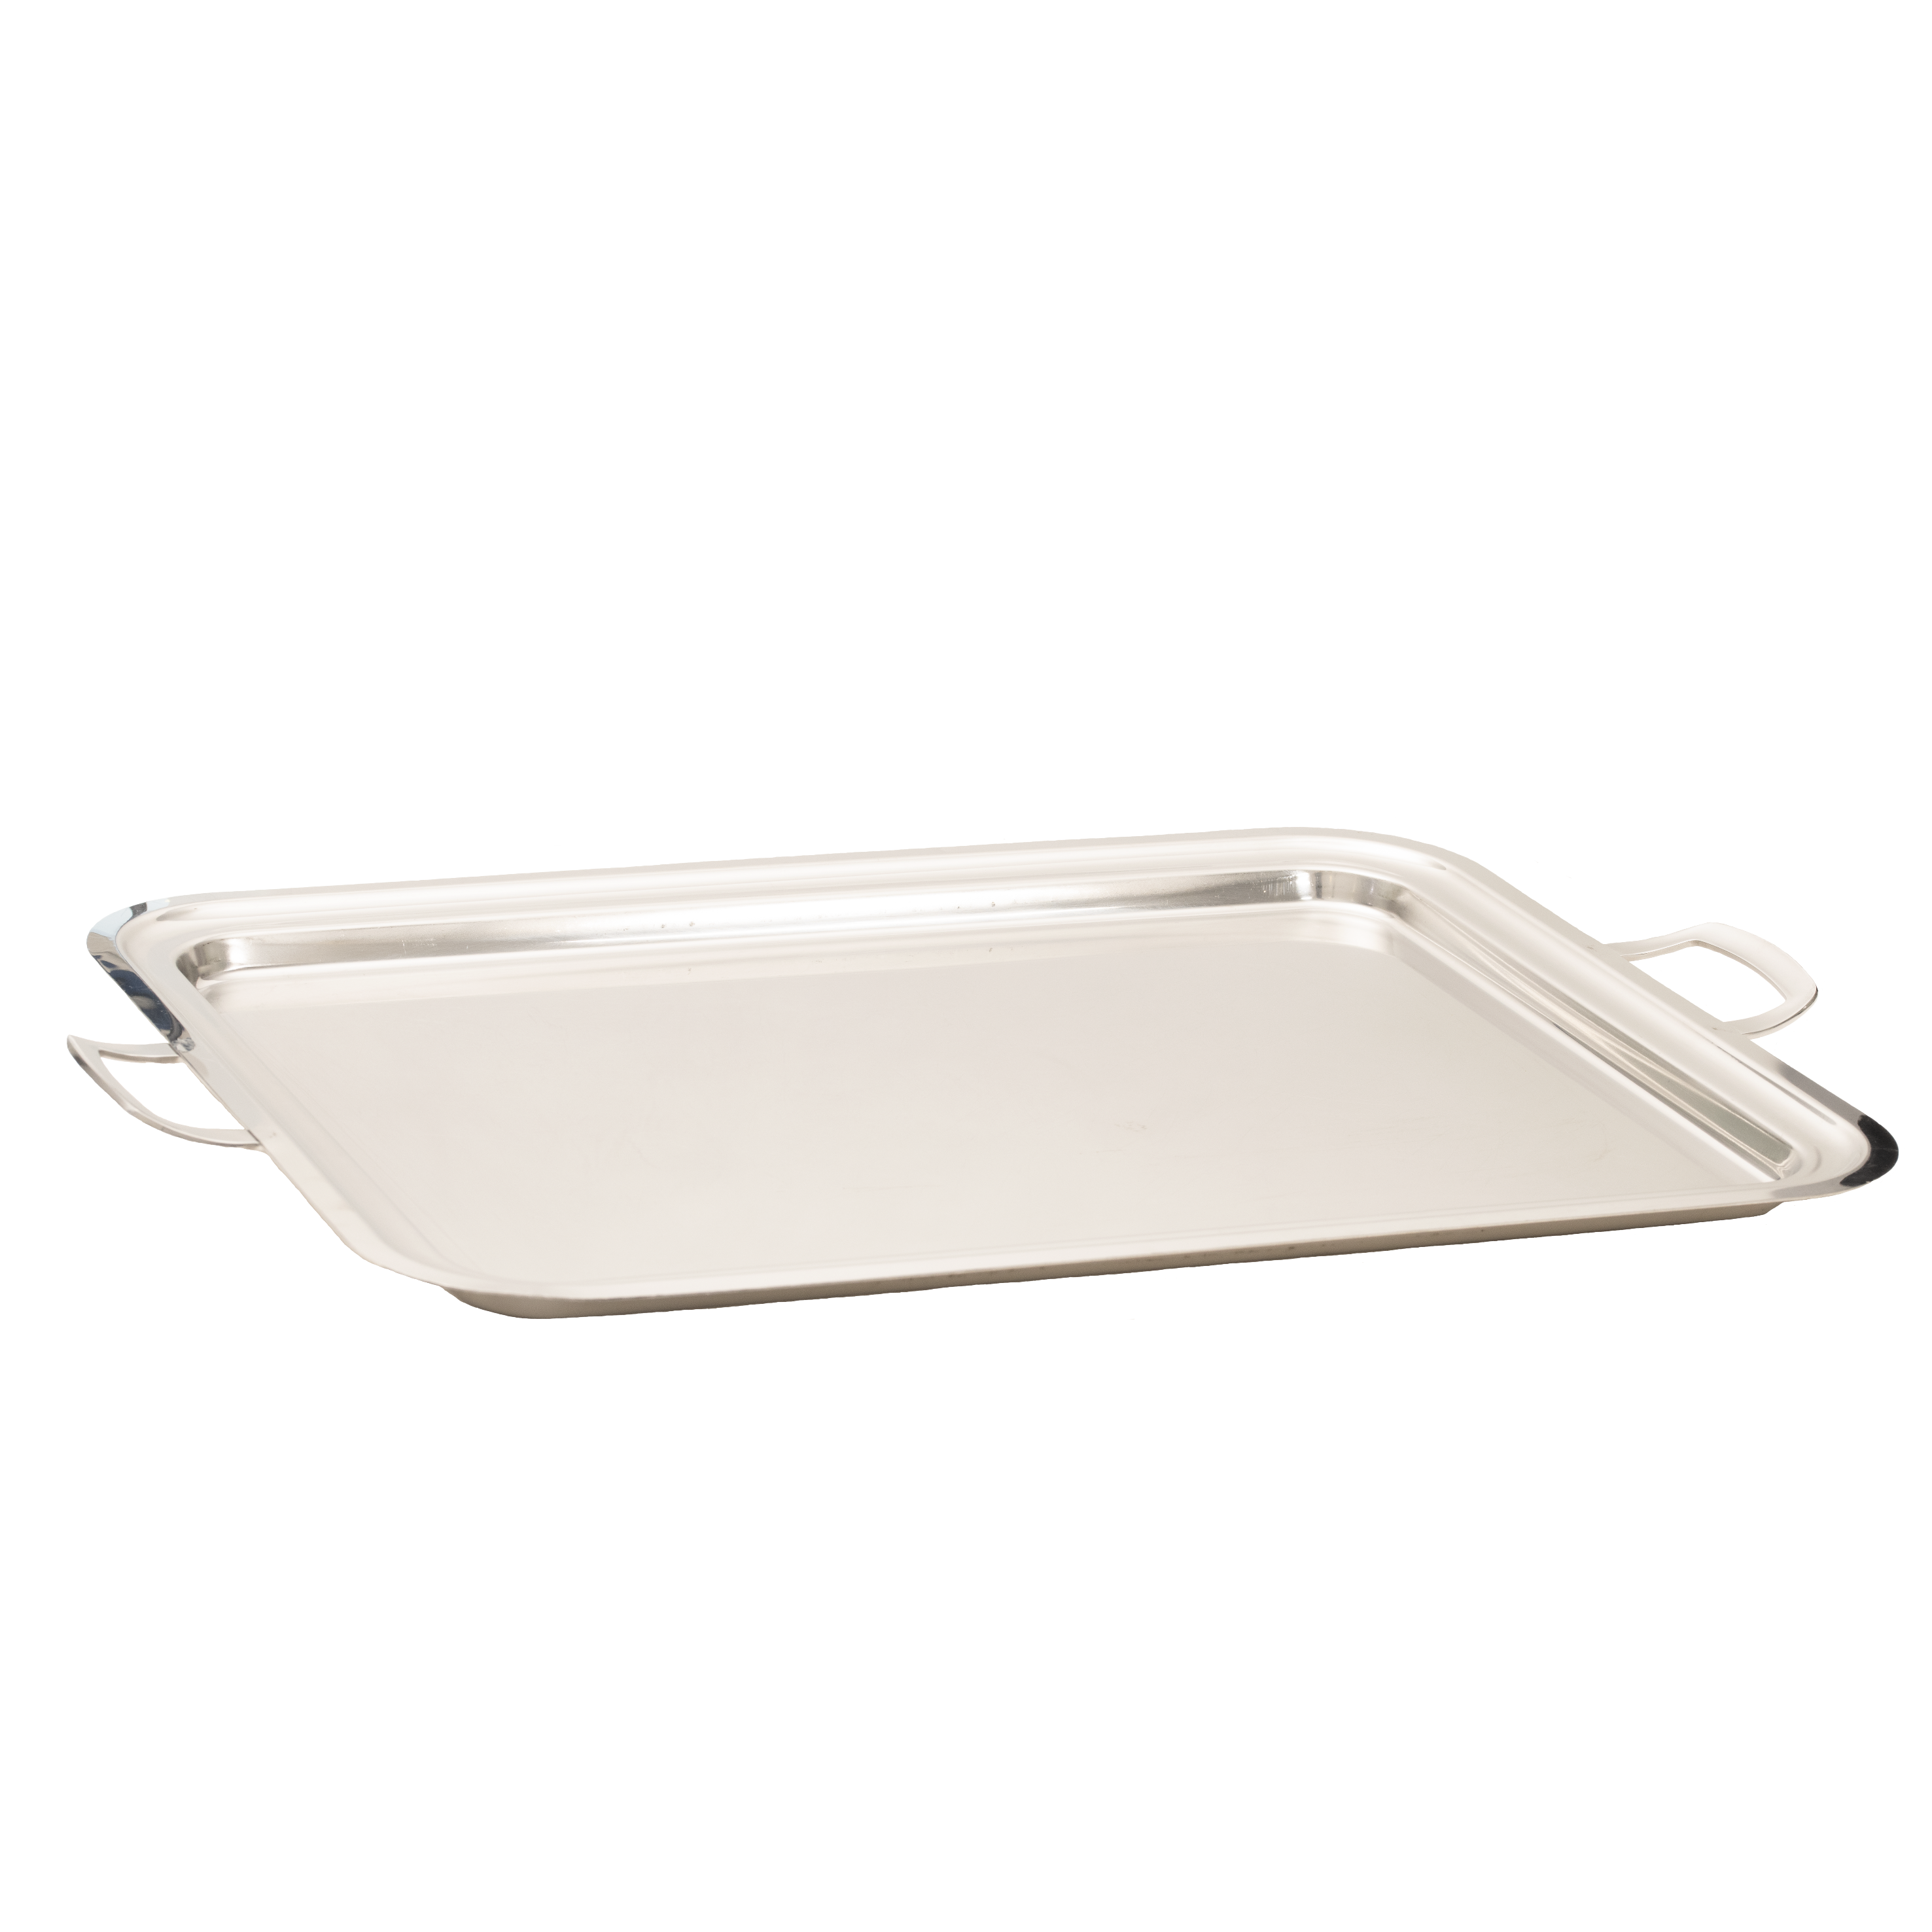 RECTANGULAR TRAY Stainless steel with handles cm 65x50